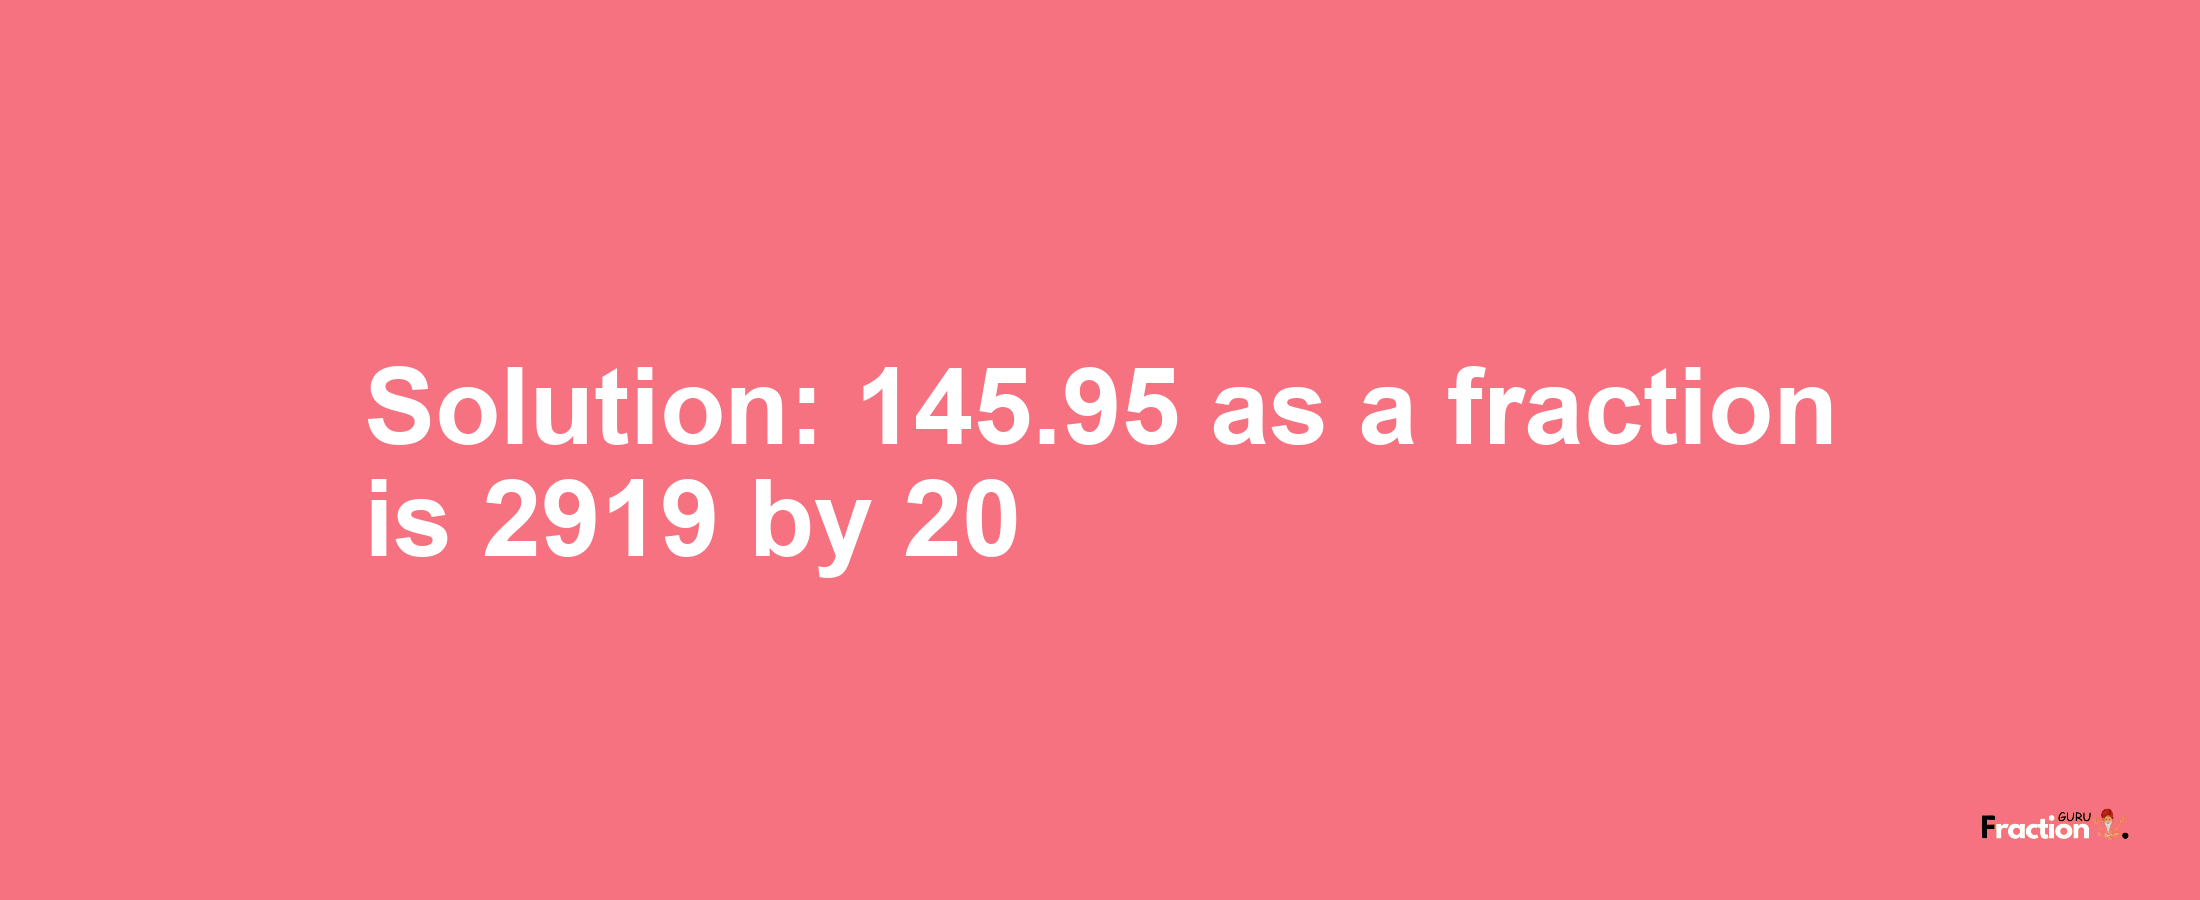 Solution:145.95 as a fraction is 2919/20